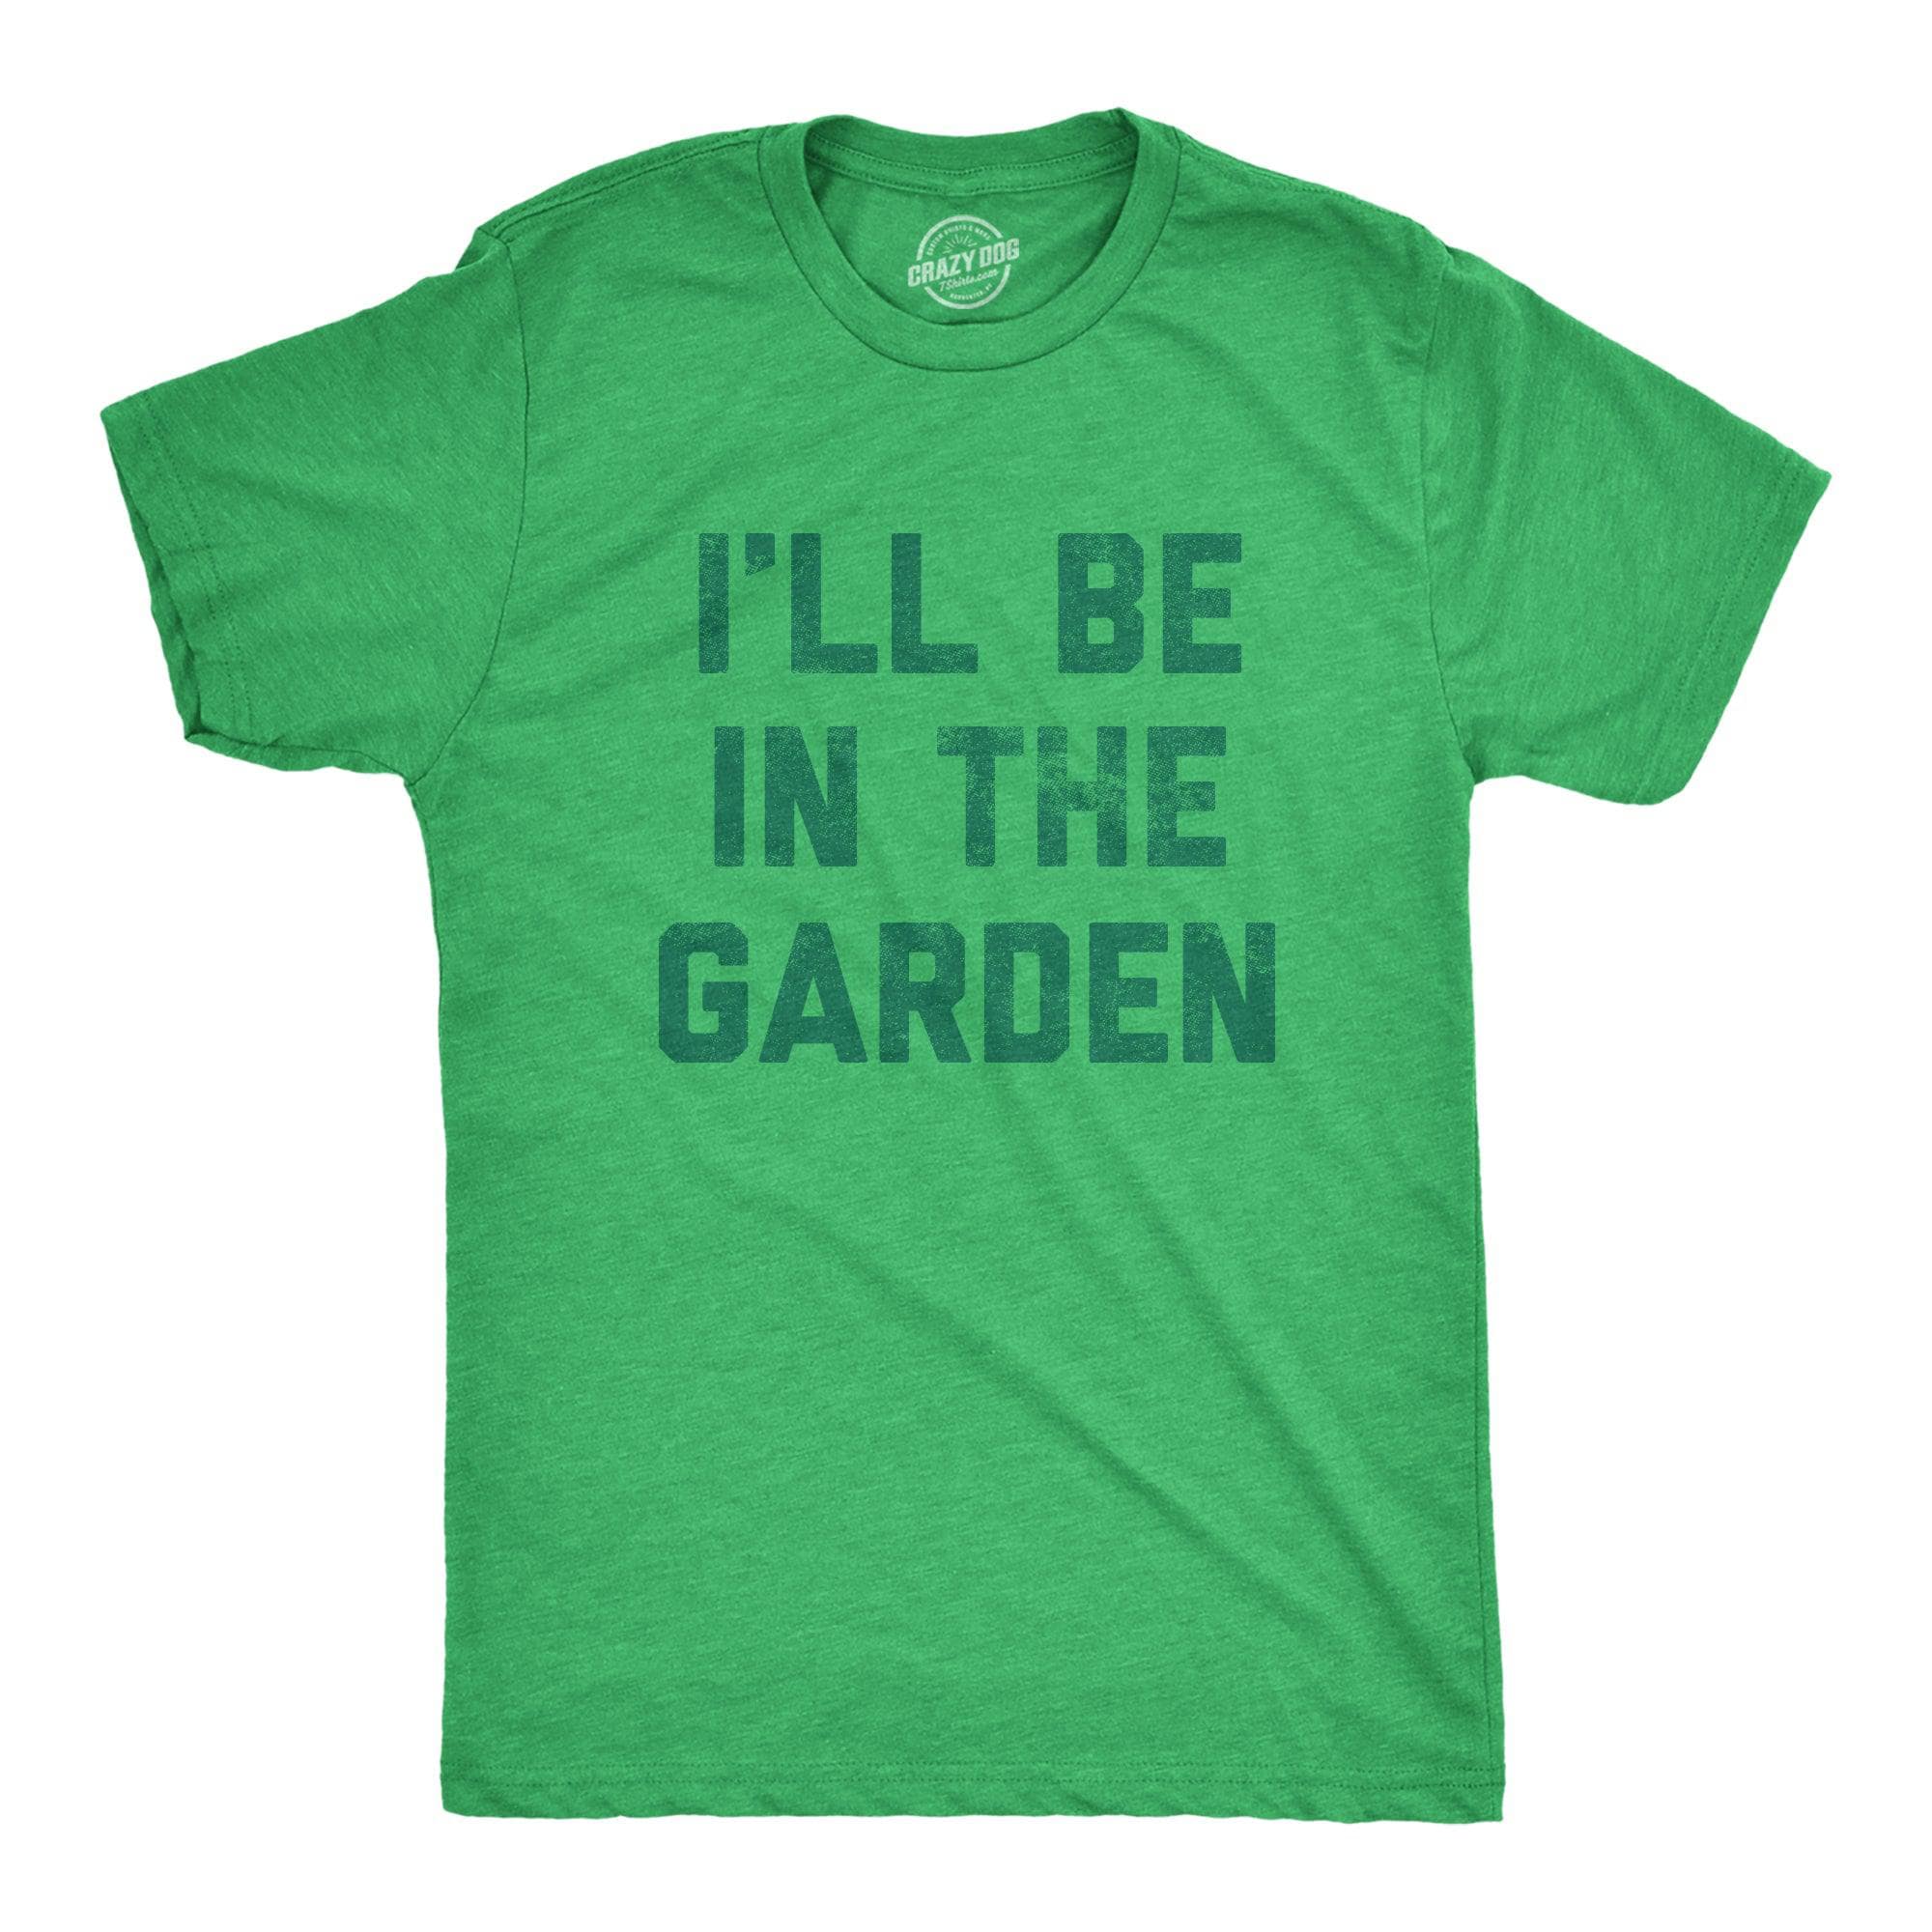 Ill Be In The Garden Men's Tshirt  -  Crazy Dog T-Shirts